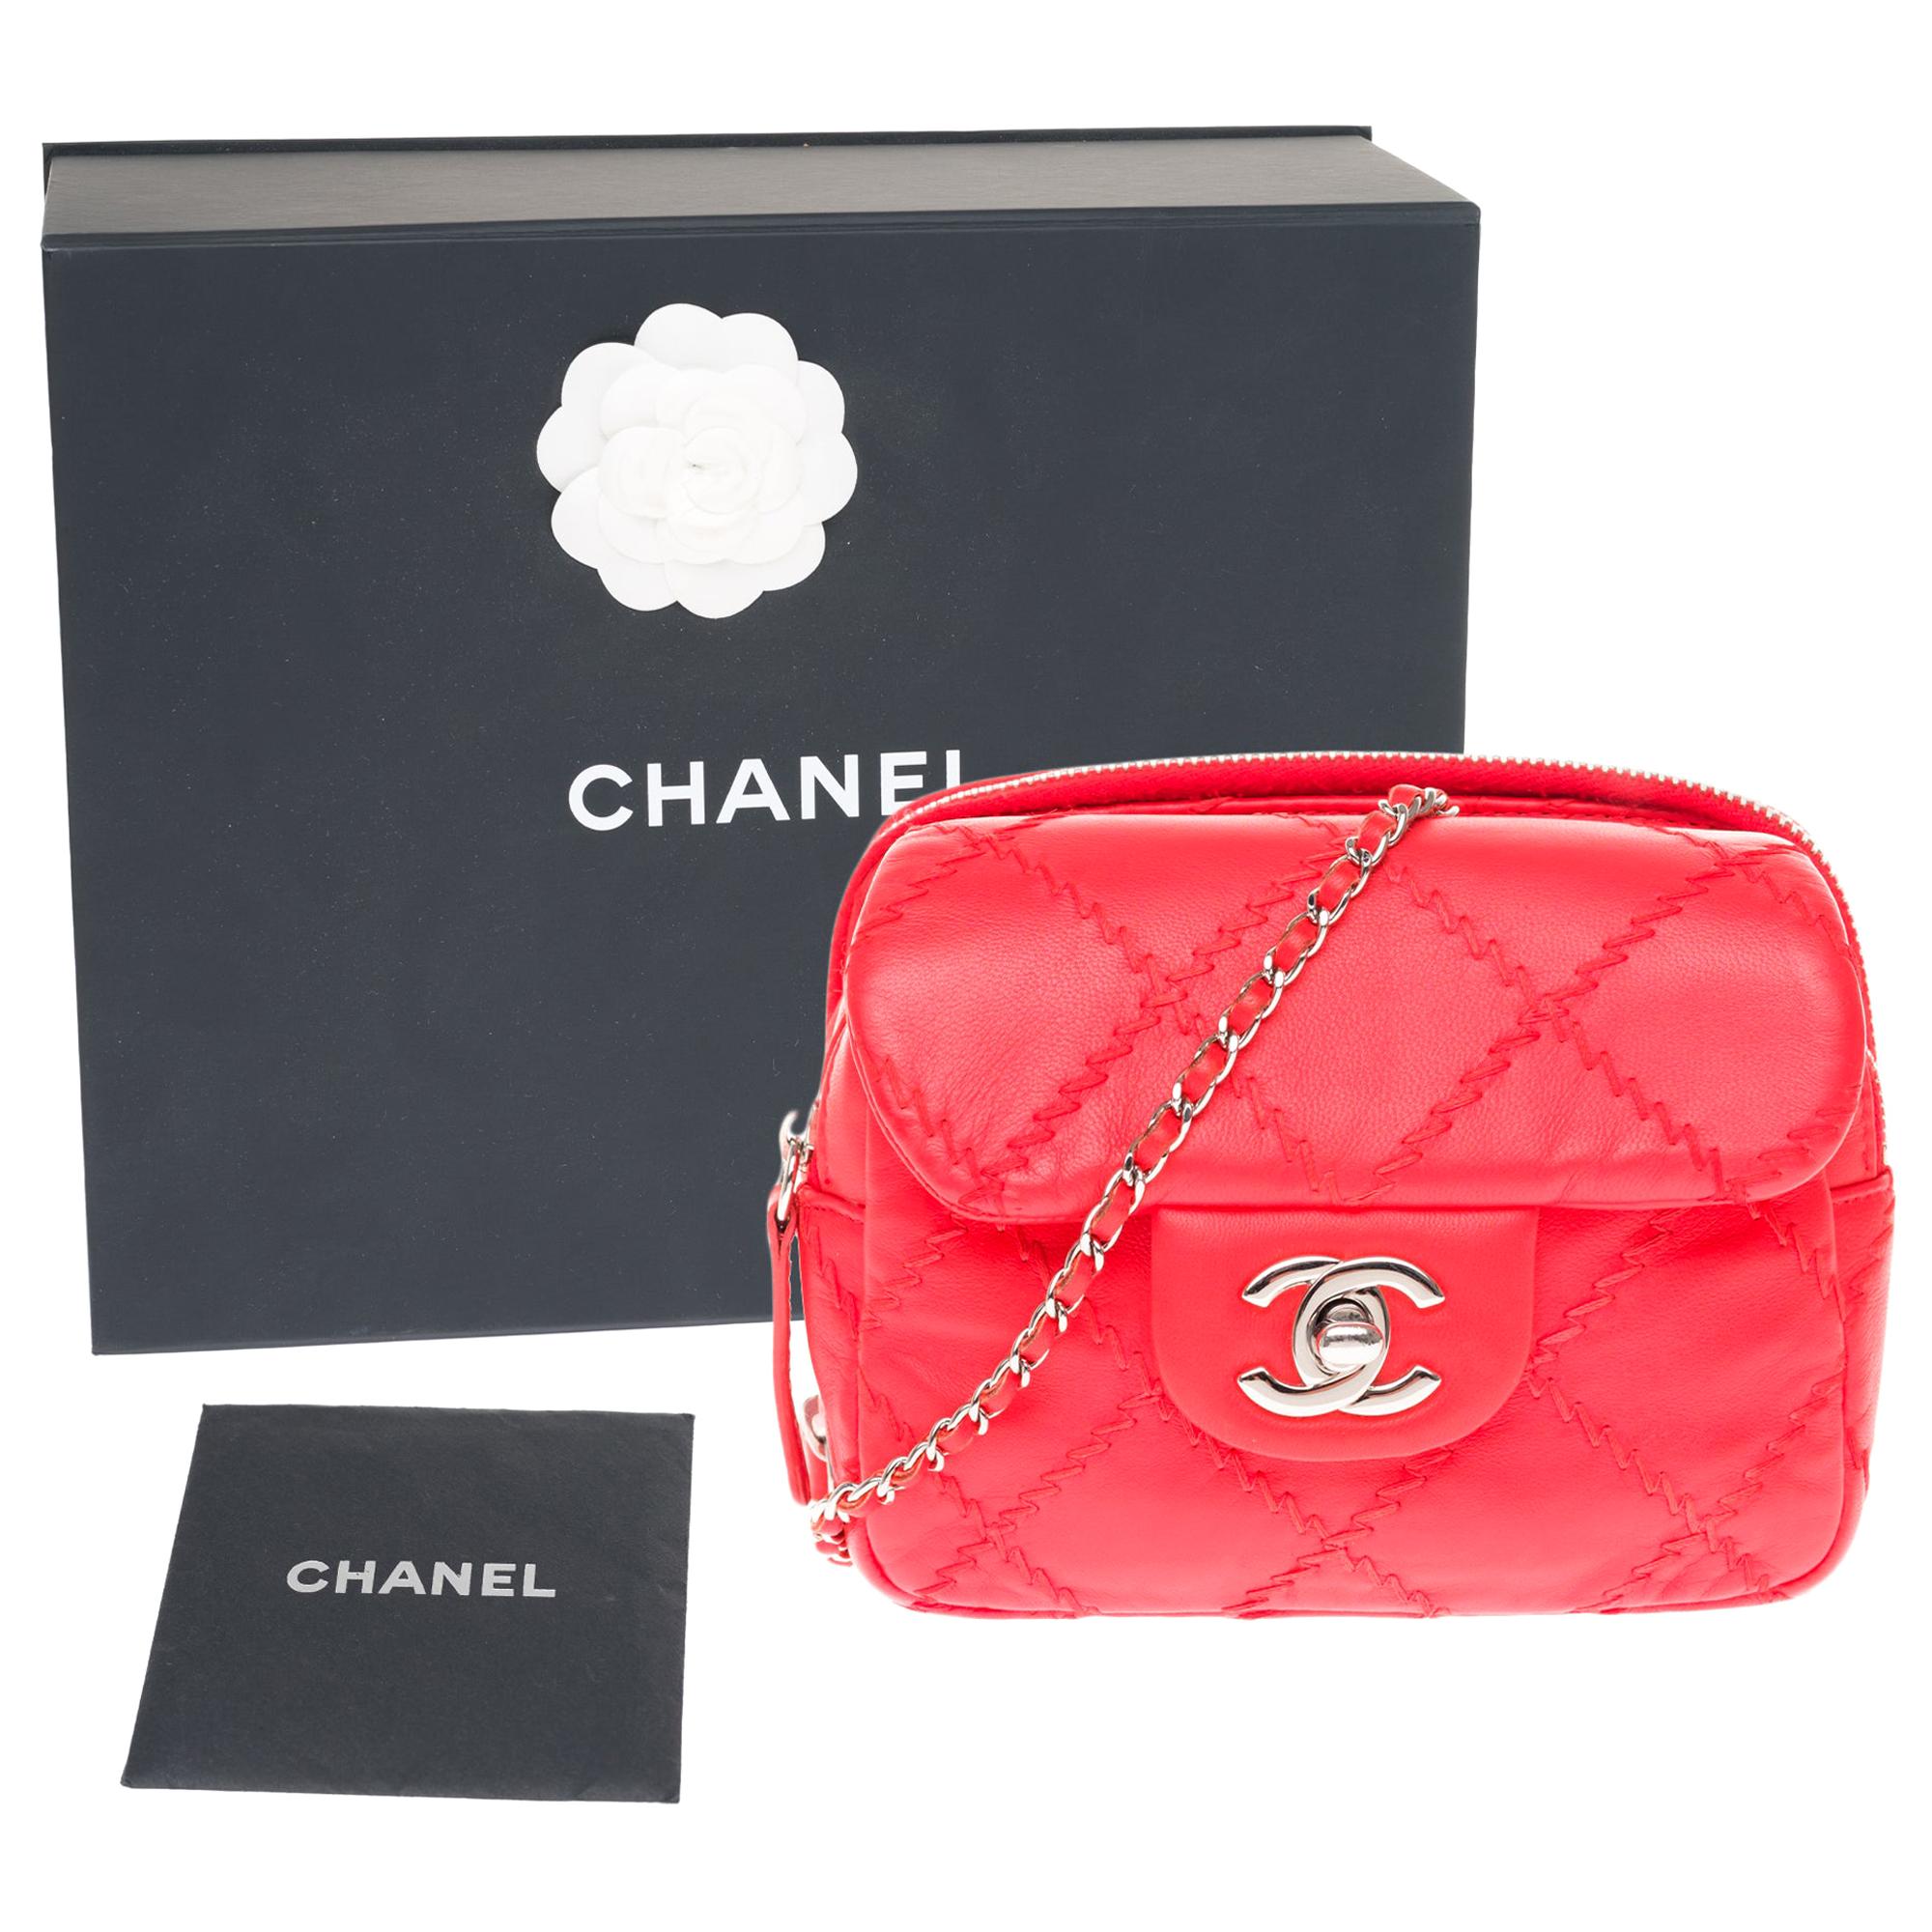 Amazing chanel Purse/Wallet in red leather and silver hardware